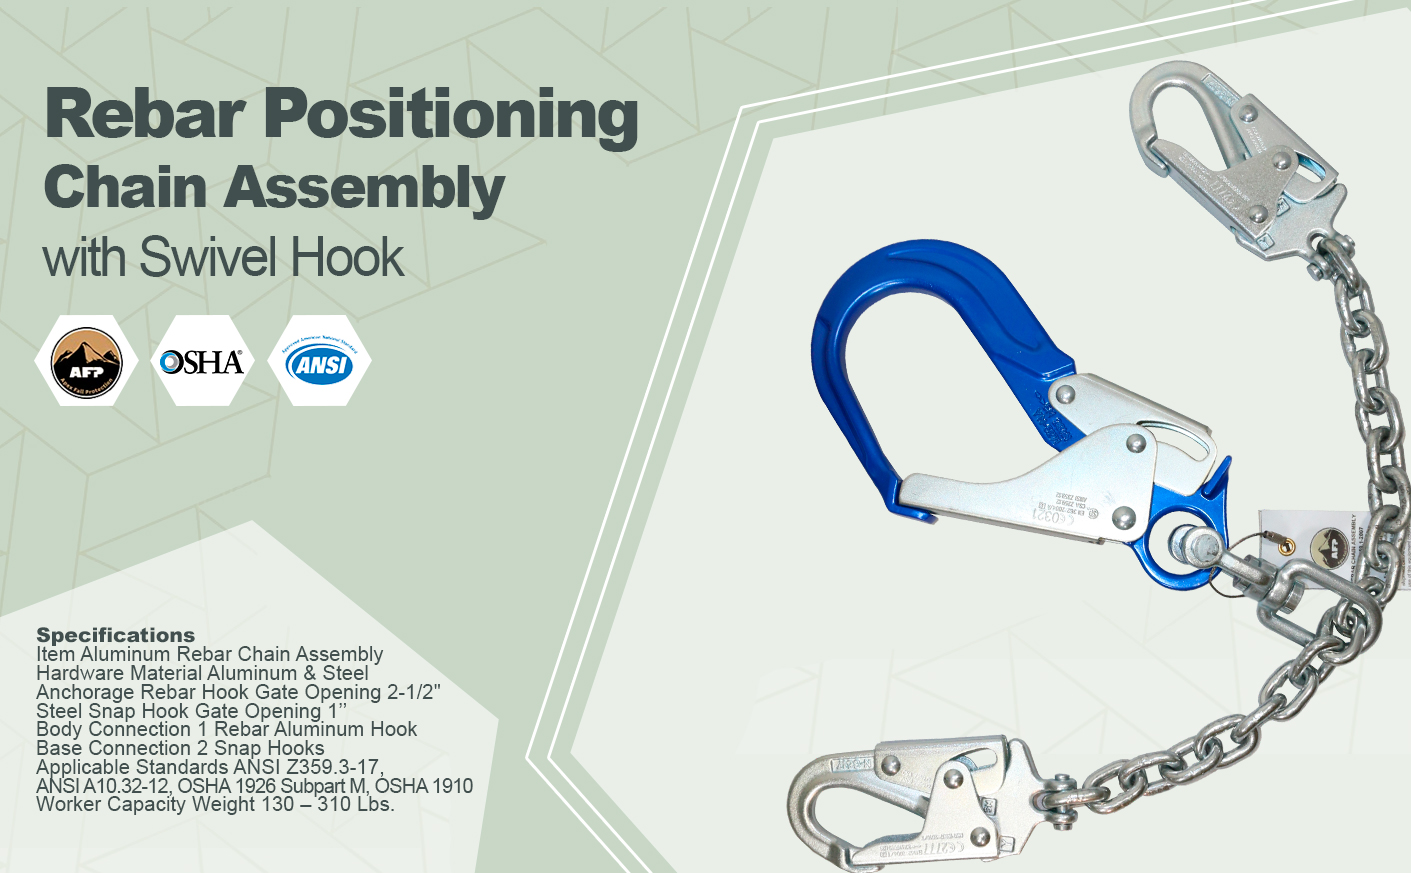 AFP Heavy-Duty 26’’ Aluminum Rebar Positioning Chain Assembly with Swivel & Steel Snap Hooks, Safety Fall Protection Positioning Restraint (OSHA/ANSI) PPE